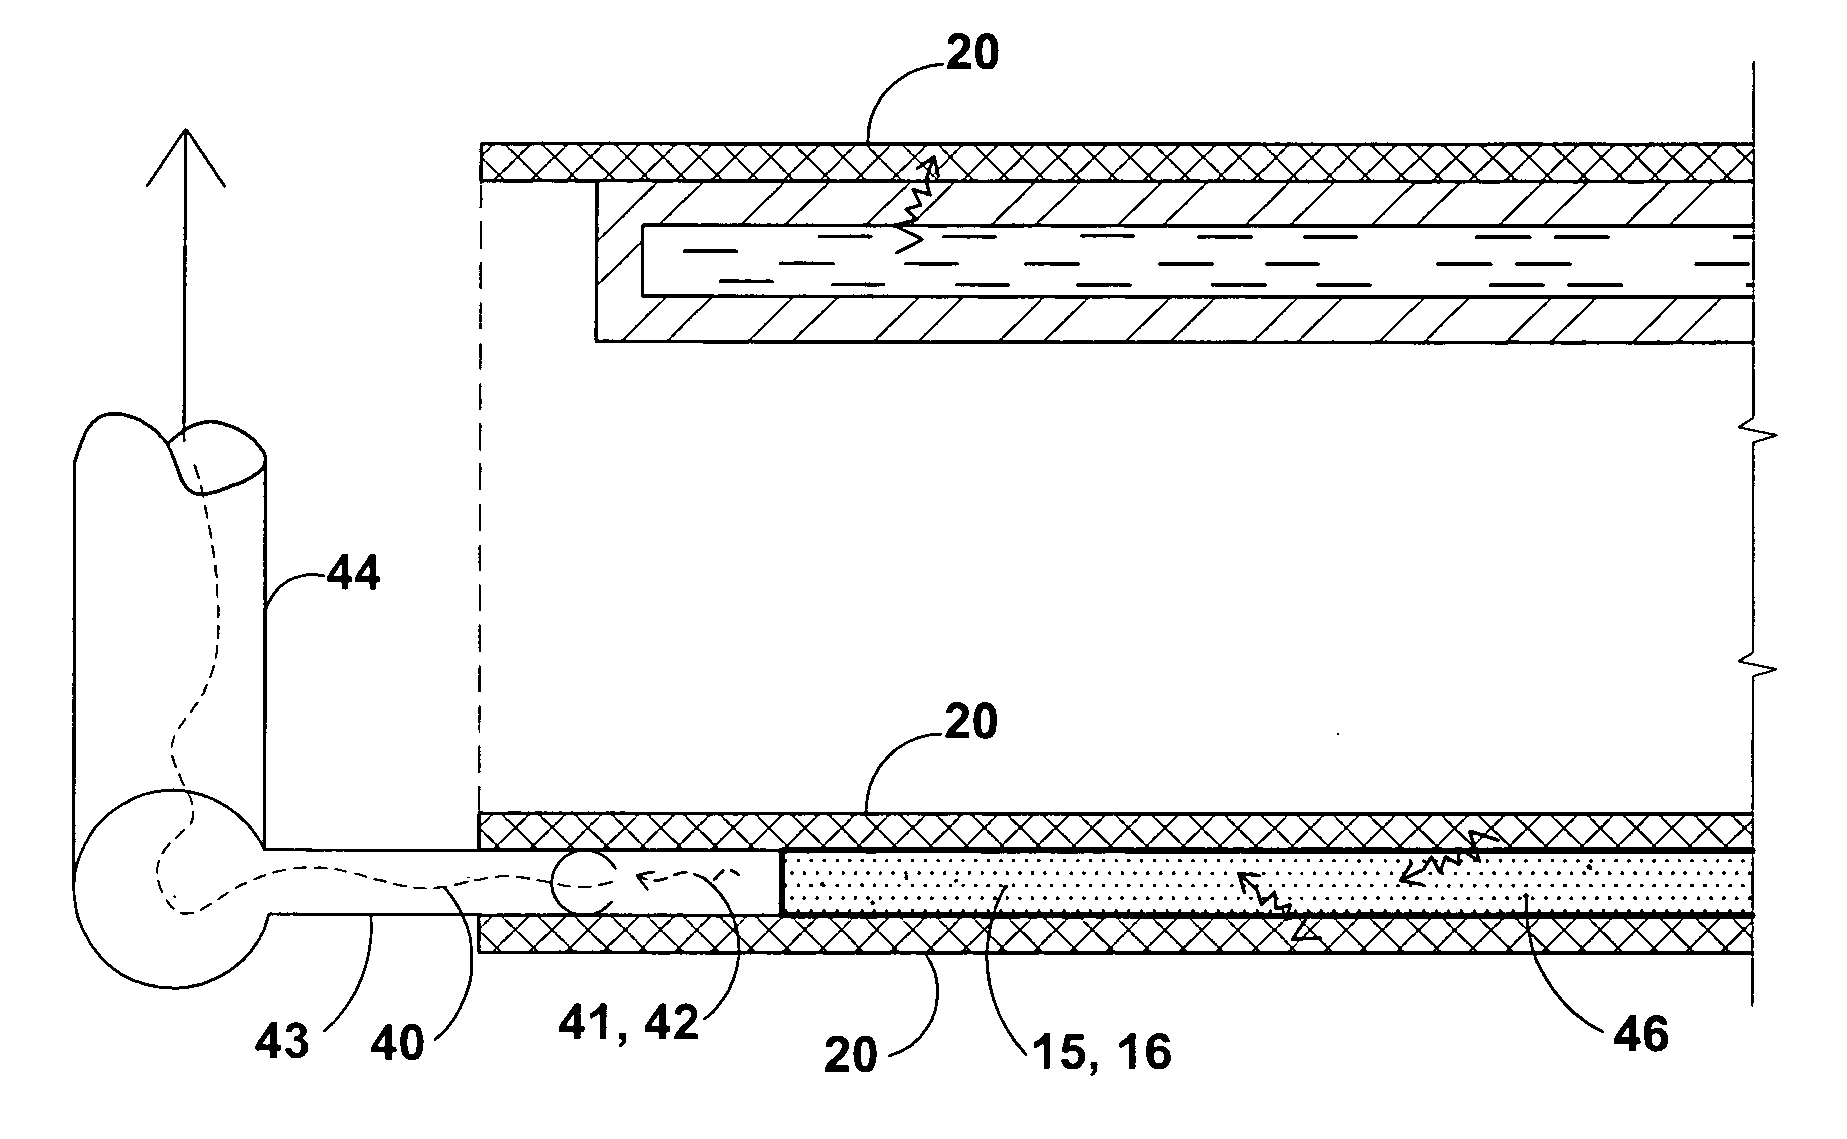 Method and apparatus for biomass torrefaction using conduction heating